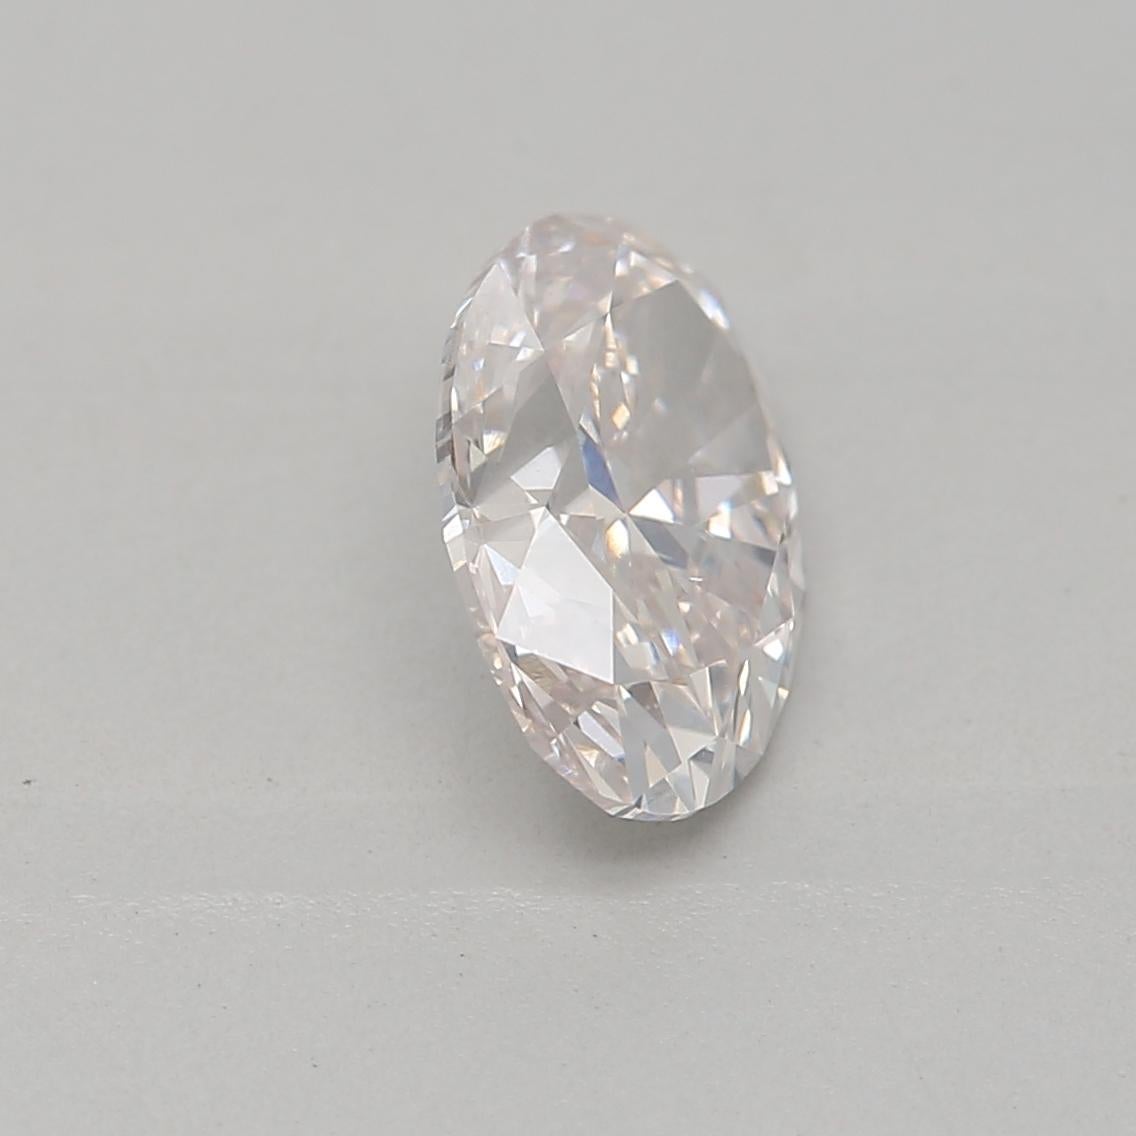 0.70 Carat Very Light Pink Oval Cut Diamond SI1 Clarity GIA Certified For Sale 2